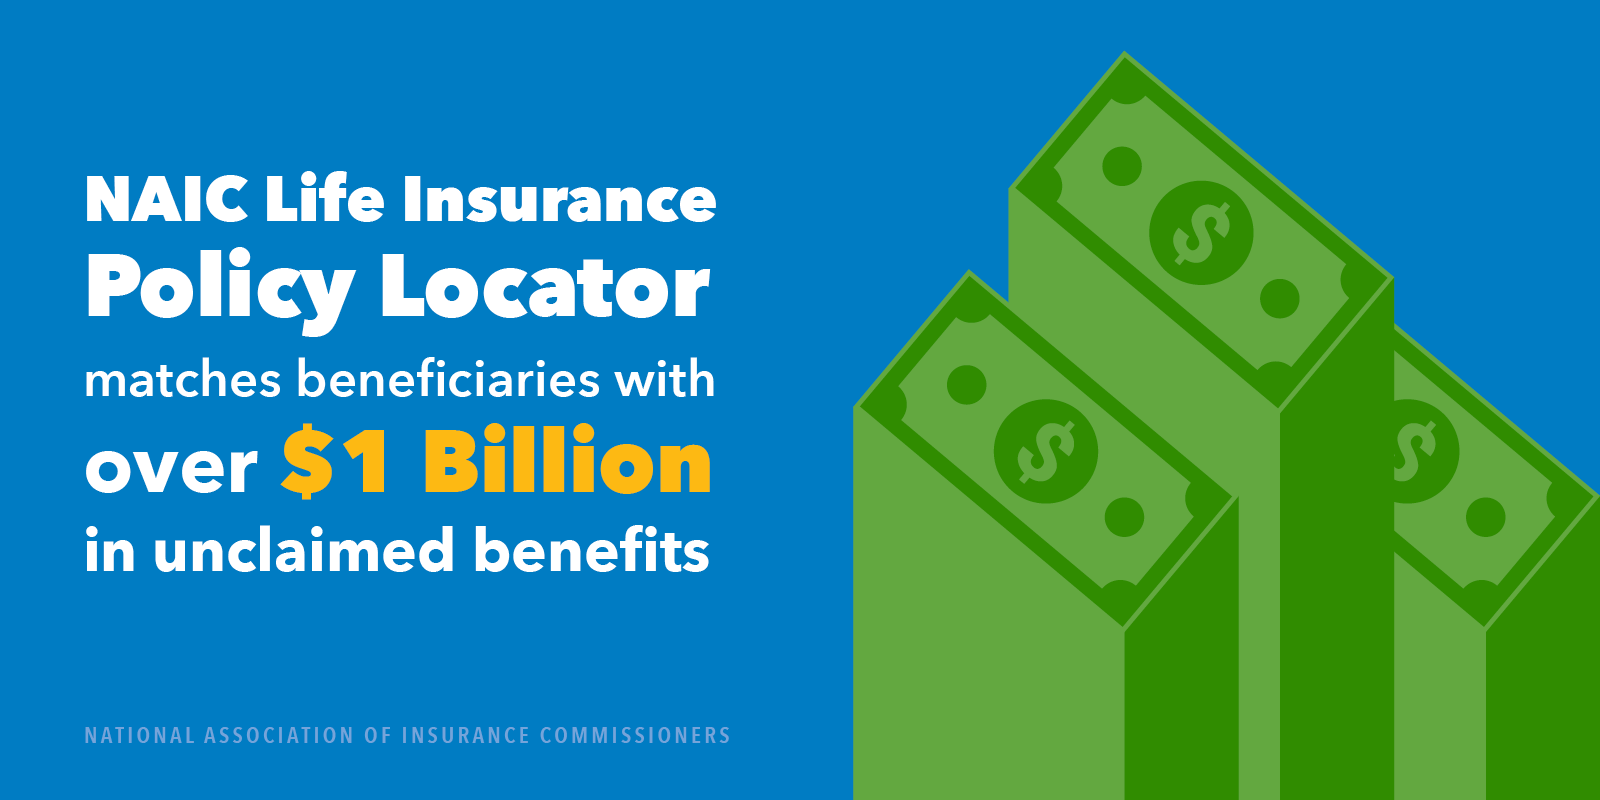 NAIC Life Insurance Policy Locator Matches More Than $1 Billion in unclaimed benefits.